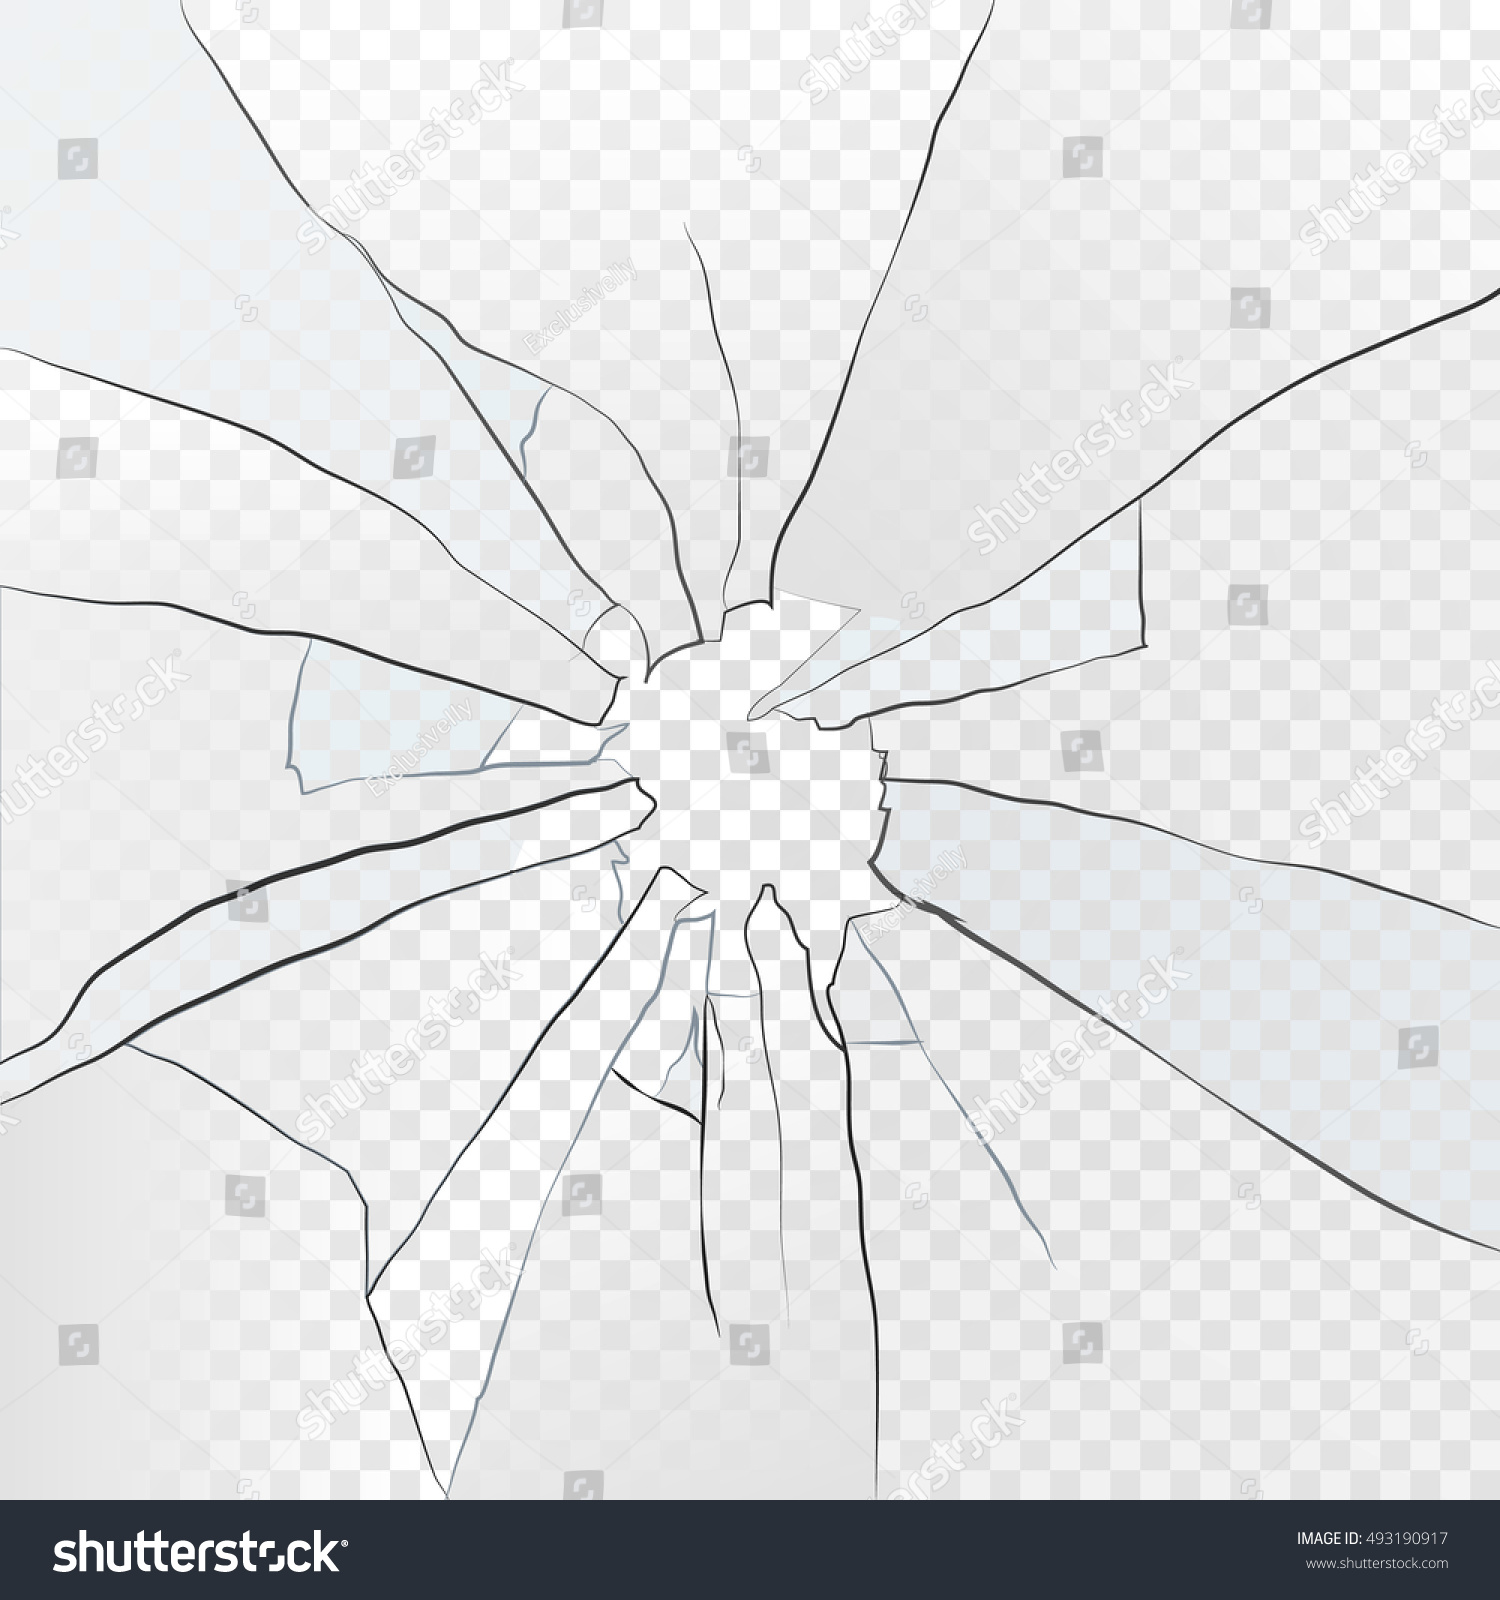 SVG of Vector broken glass, on a plaid background. With the effect of transparency for each color of the mood background. svg